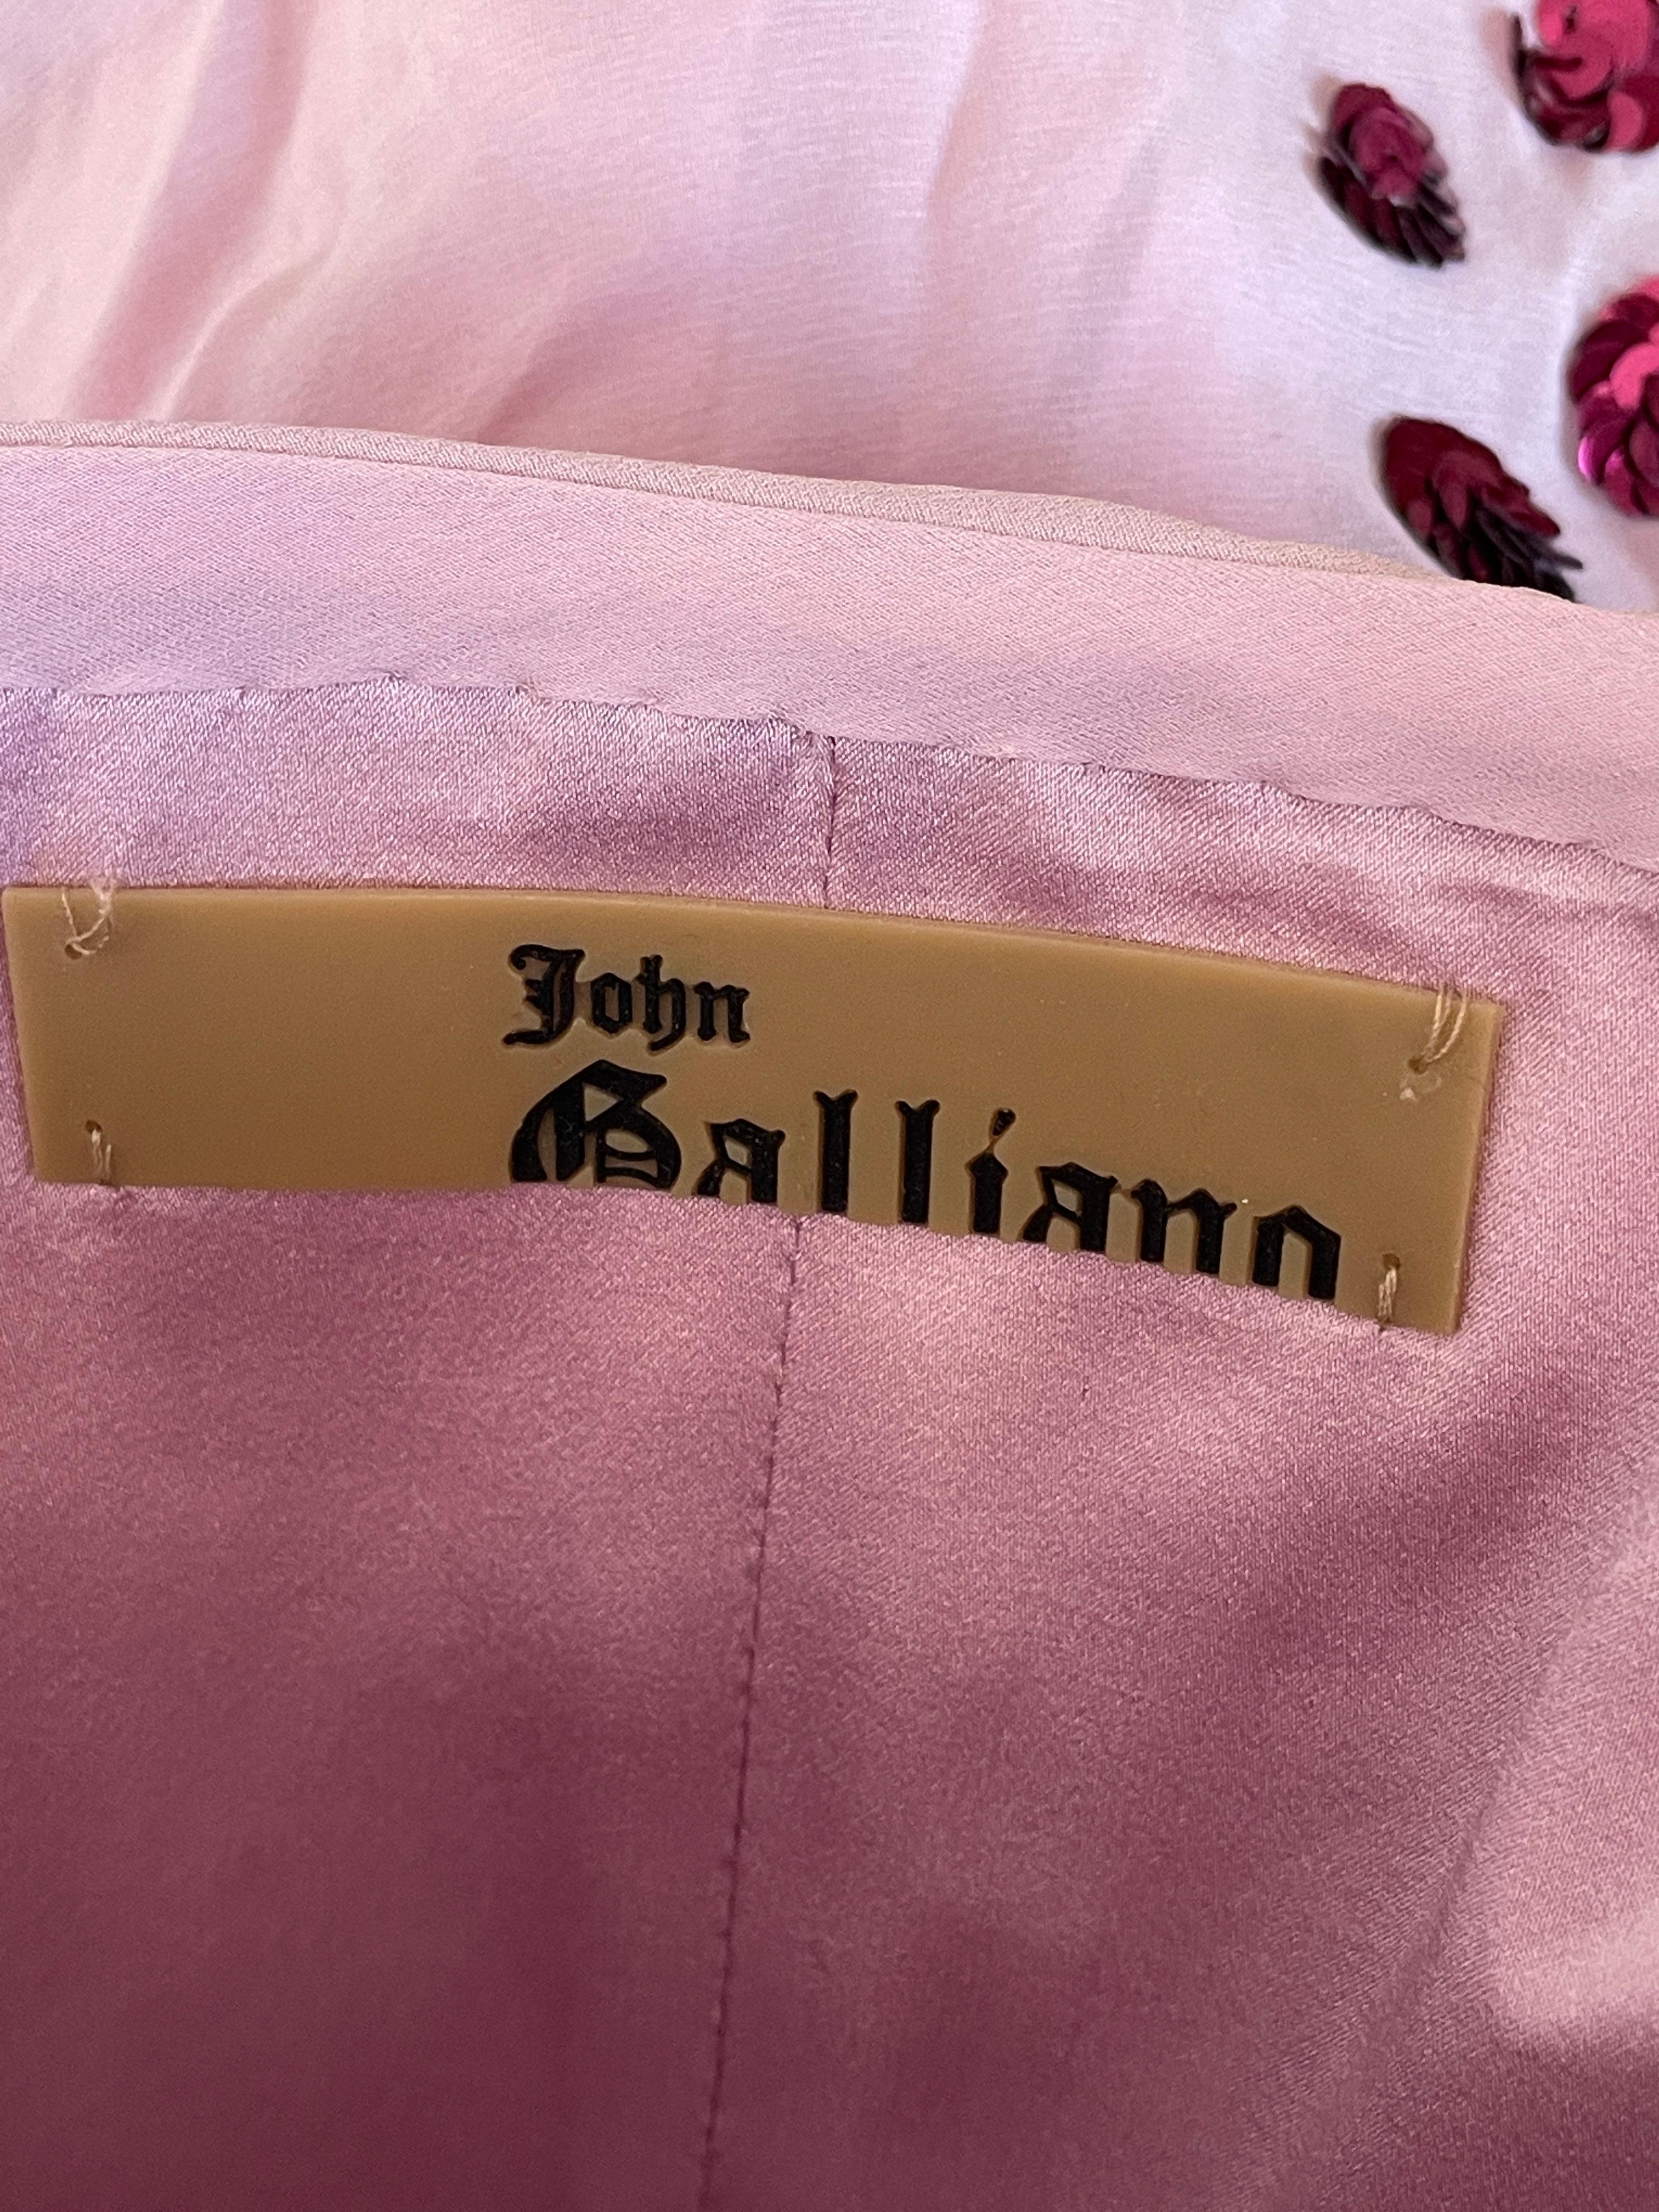 Women's John Galliano Sequin Spring 2007 Draped Pink Silk Cocktail Dress w Inner Corset For Sale